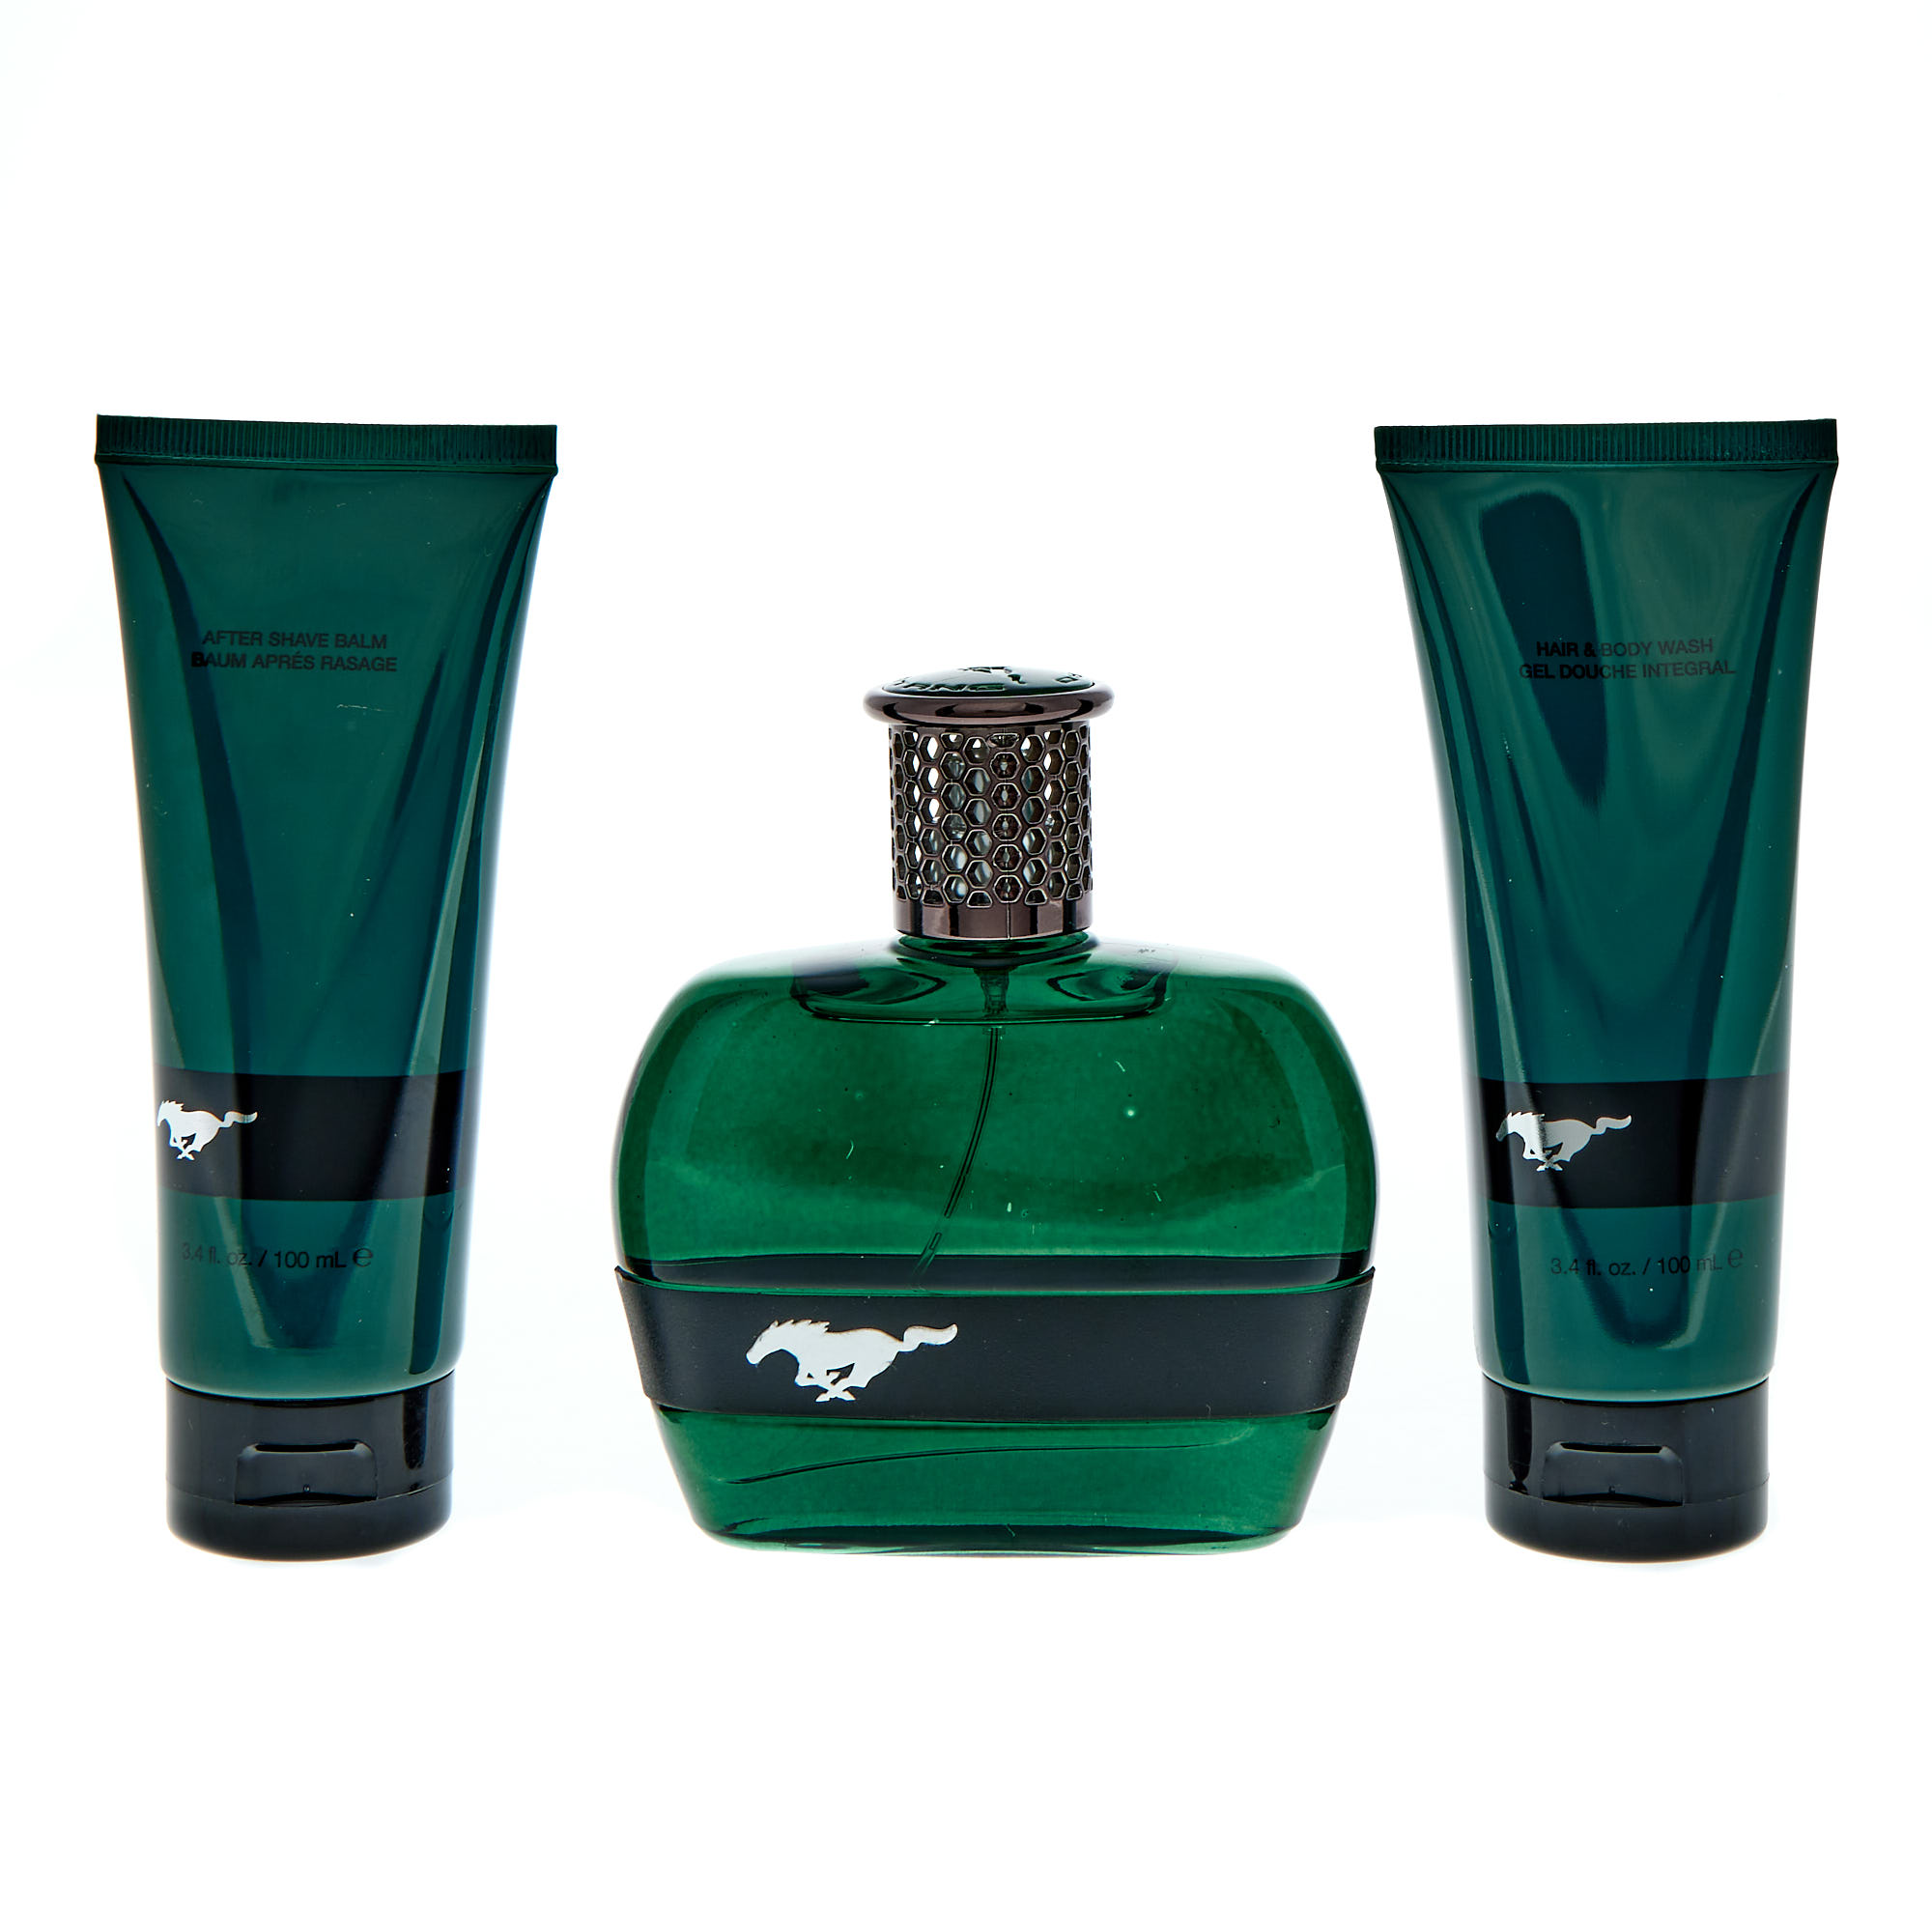 Ford Mustang Green 3 Piece Gift Set